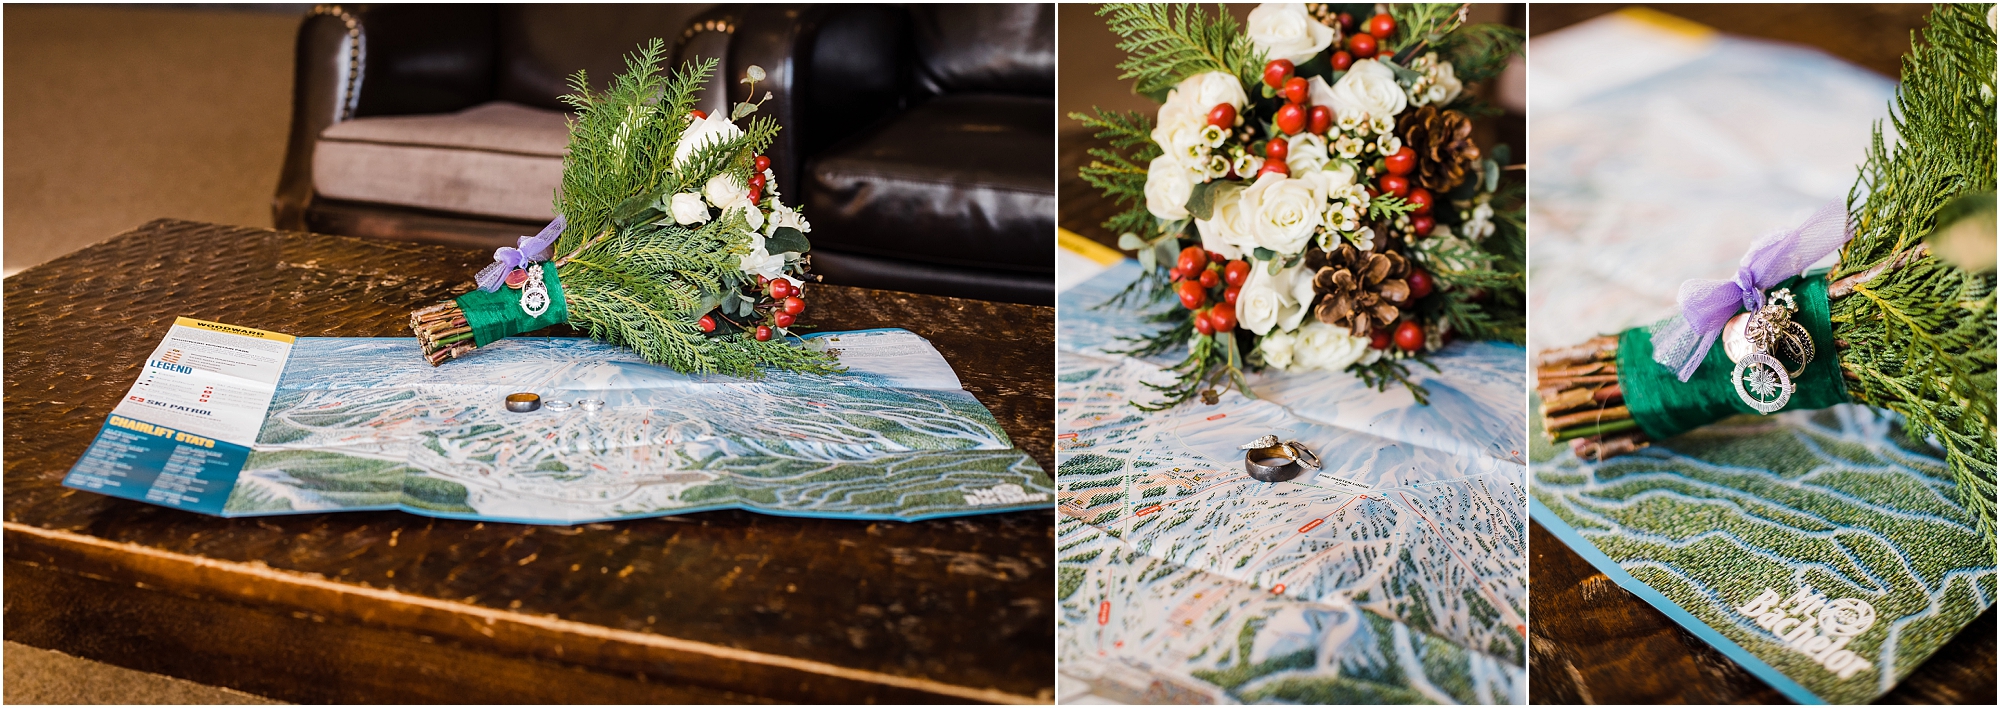 A beautiful winter bouquet of white flowers, red berries, pine cones and green pine boughs sits atop a Mt Bachelor trail map along with the wedding rings for a skiing elopement at Mt Bachelor Ski Resort in Bend, Oregon. | Erica Swantek Photography 